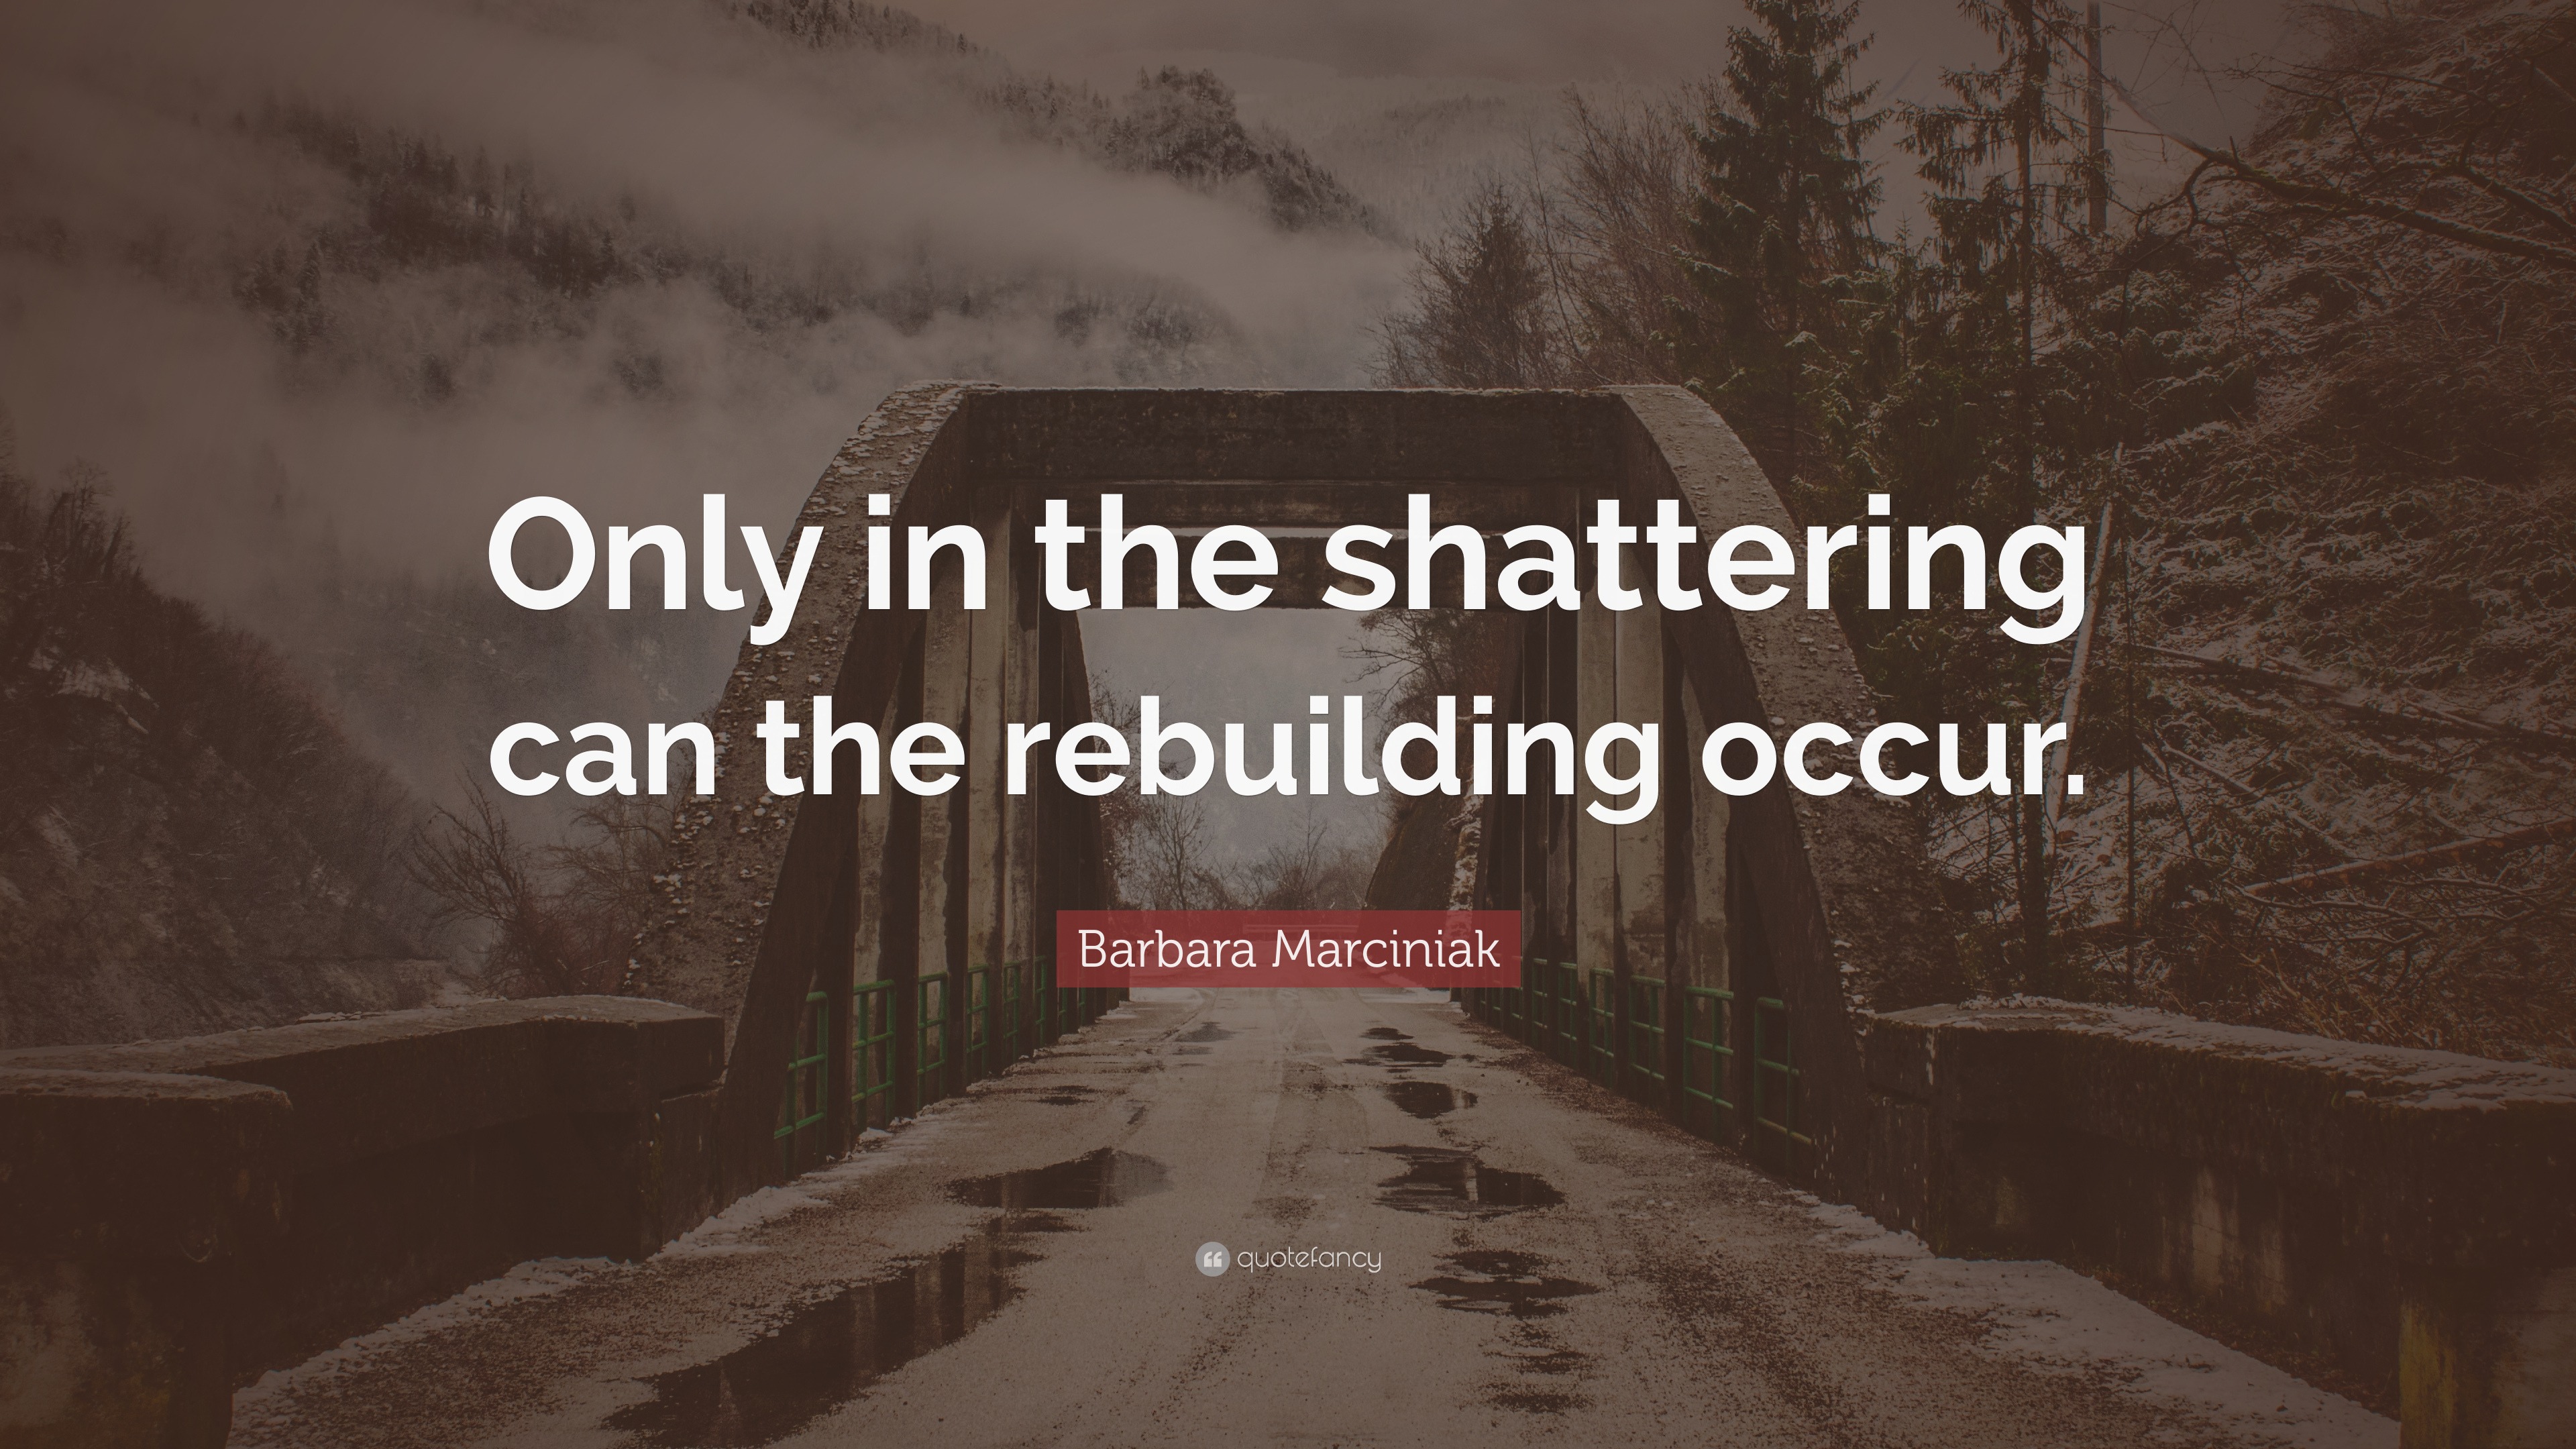 Barbara Marciniak Quote: “Only in the shattering can the rebuilding occur.”